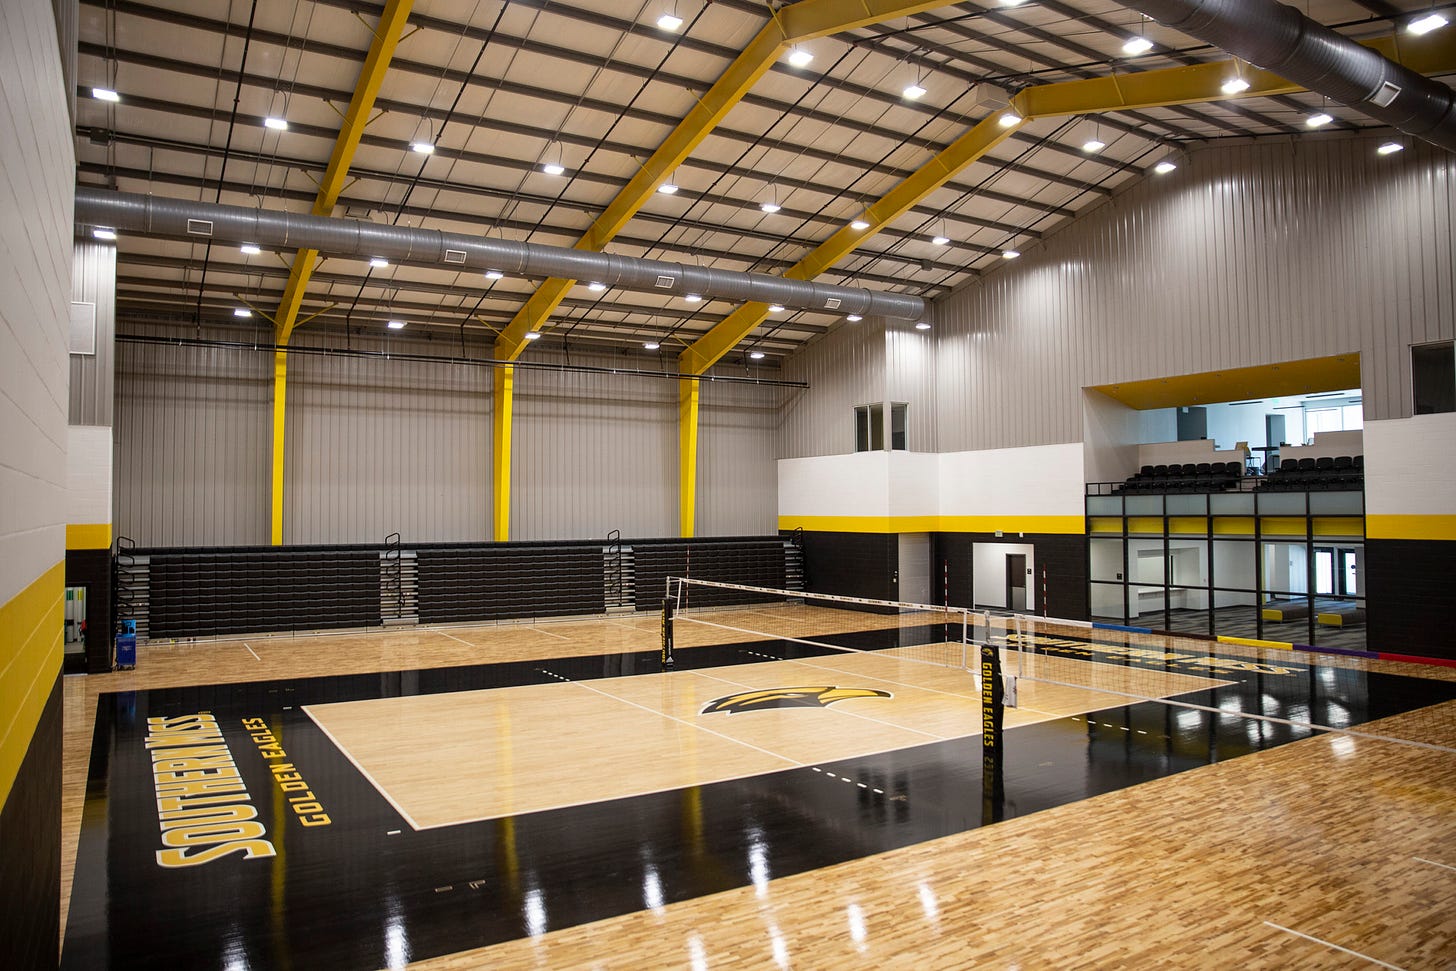 Southern Miss knew Human Services funds paid for volleyball center  construction, auditor found - Mississippi Today